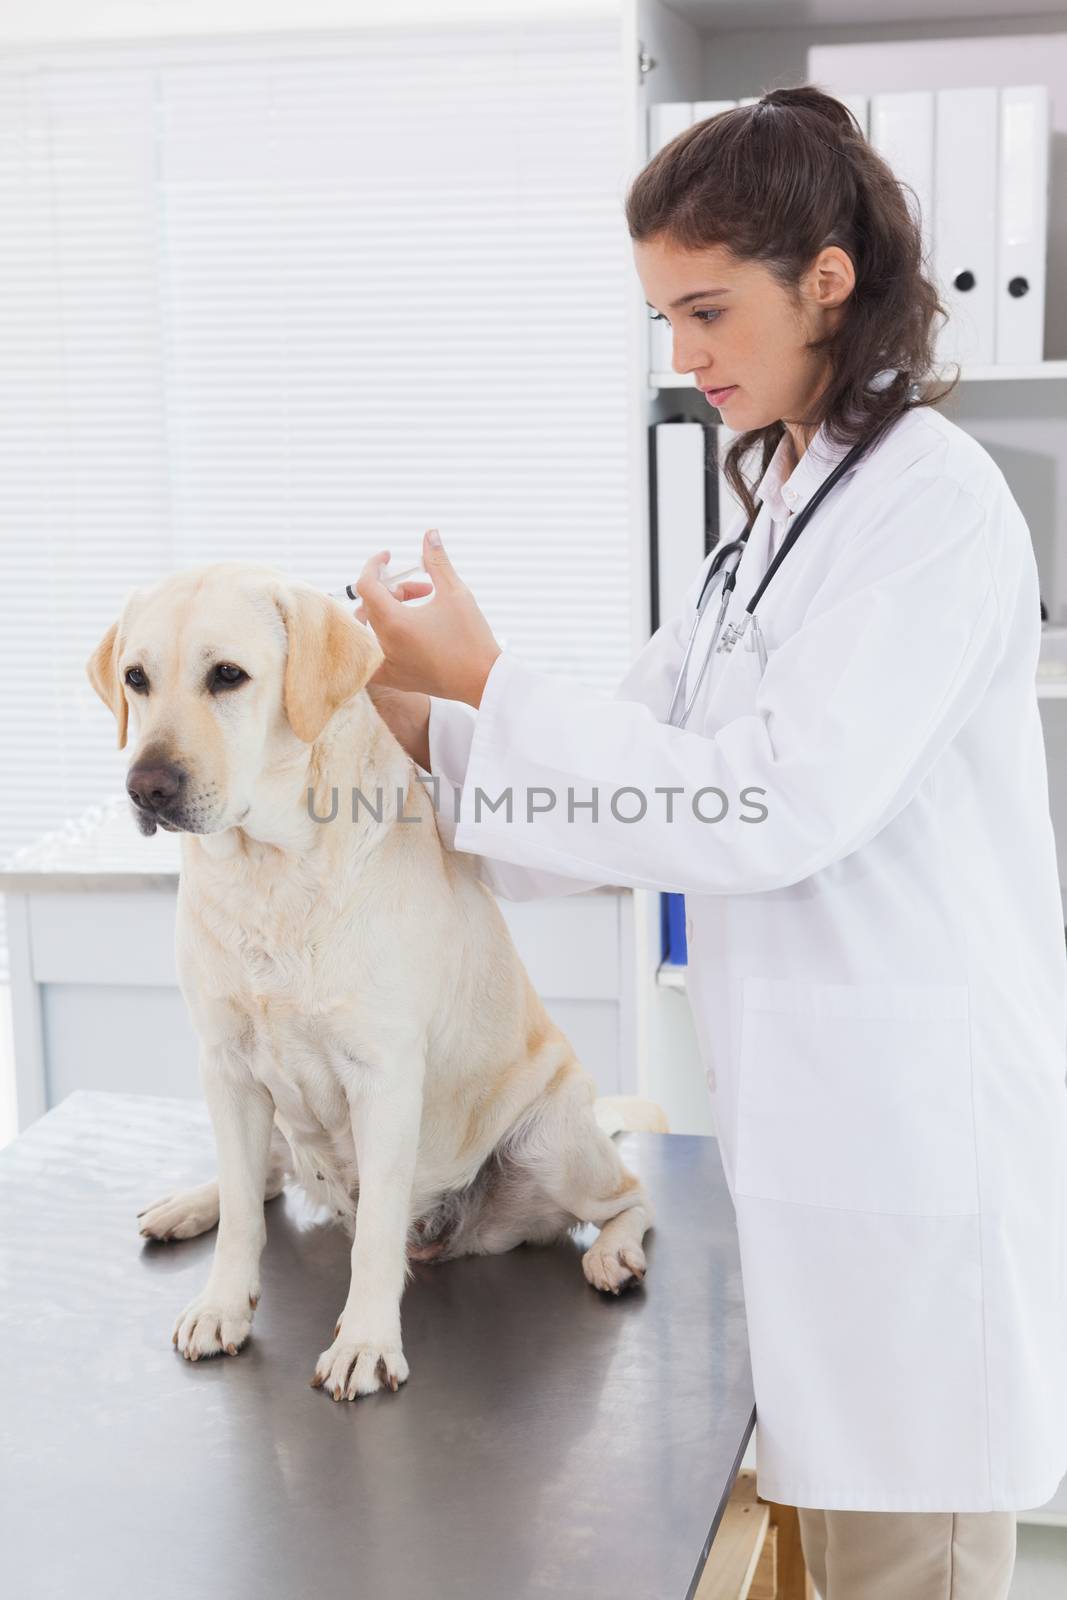 Veterinarian doing injection at a cute dog by Wavebreakmedia